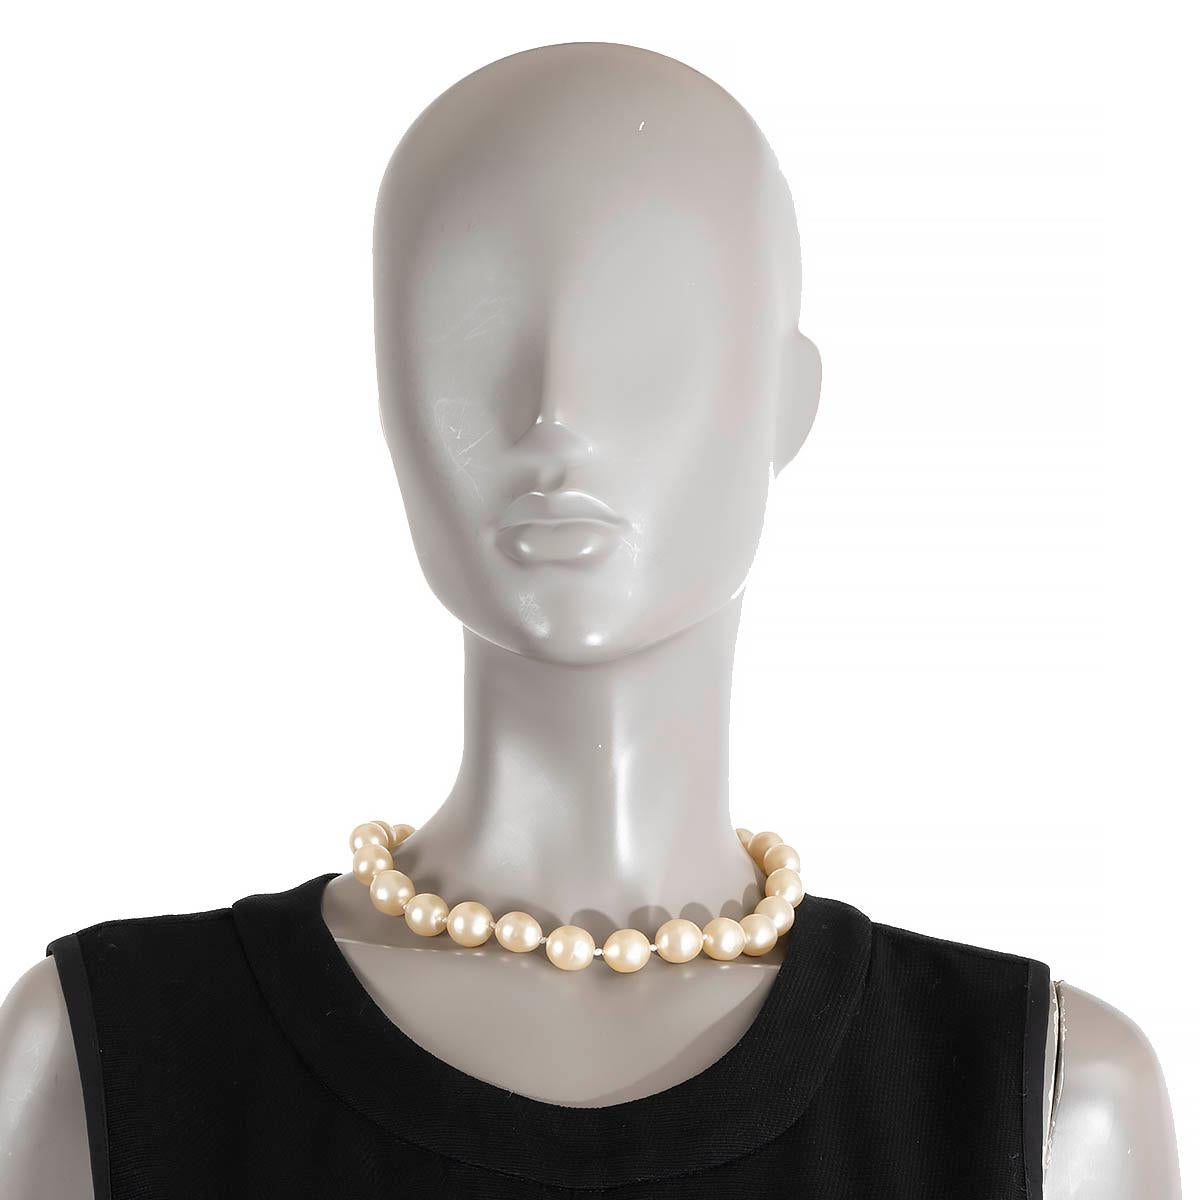 100% authentic Chanel vintage faux pearls necklace with gold-tone hook closure.  Has been worn and is in excellent condition.

Width	1.3cm (0.5in)
Length	44cm (17.2in)
Hardware	Gold-Tone

All our listings include only the listed item unless